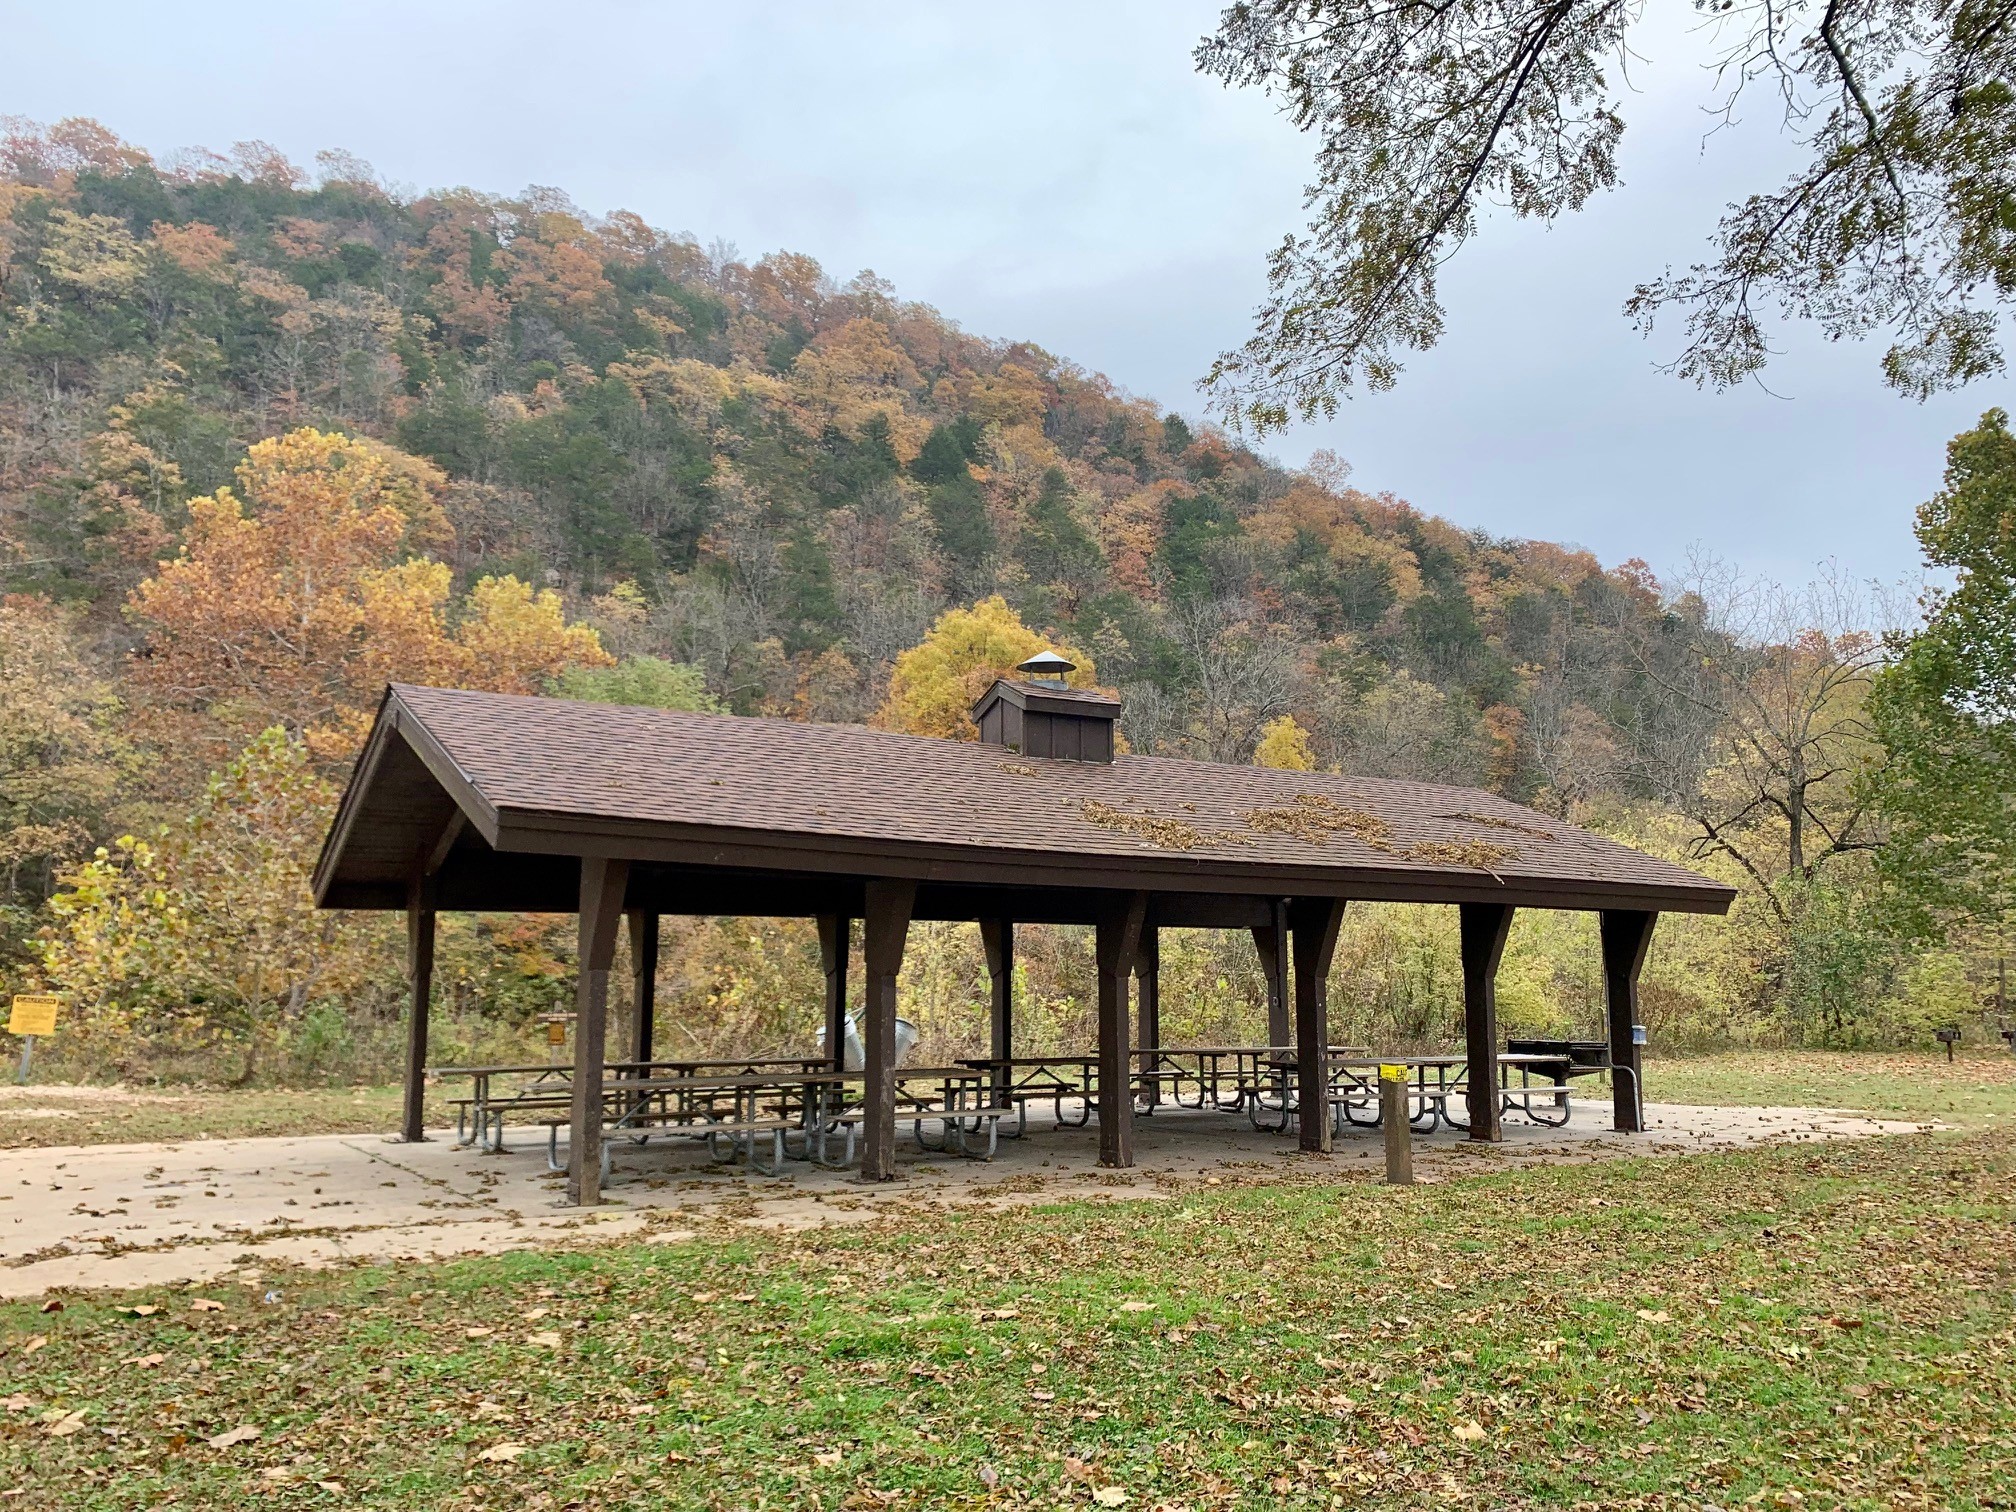 Open picnic shelter with a tree-covered hill in the background